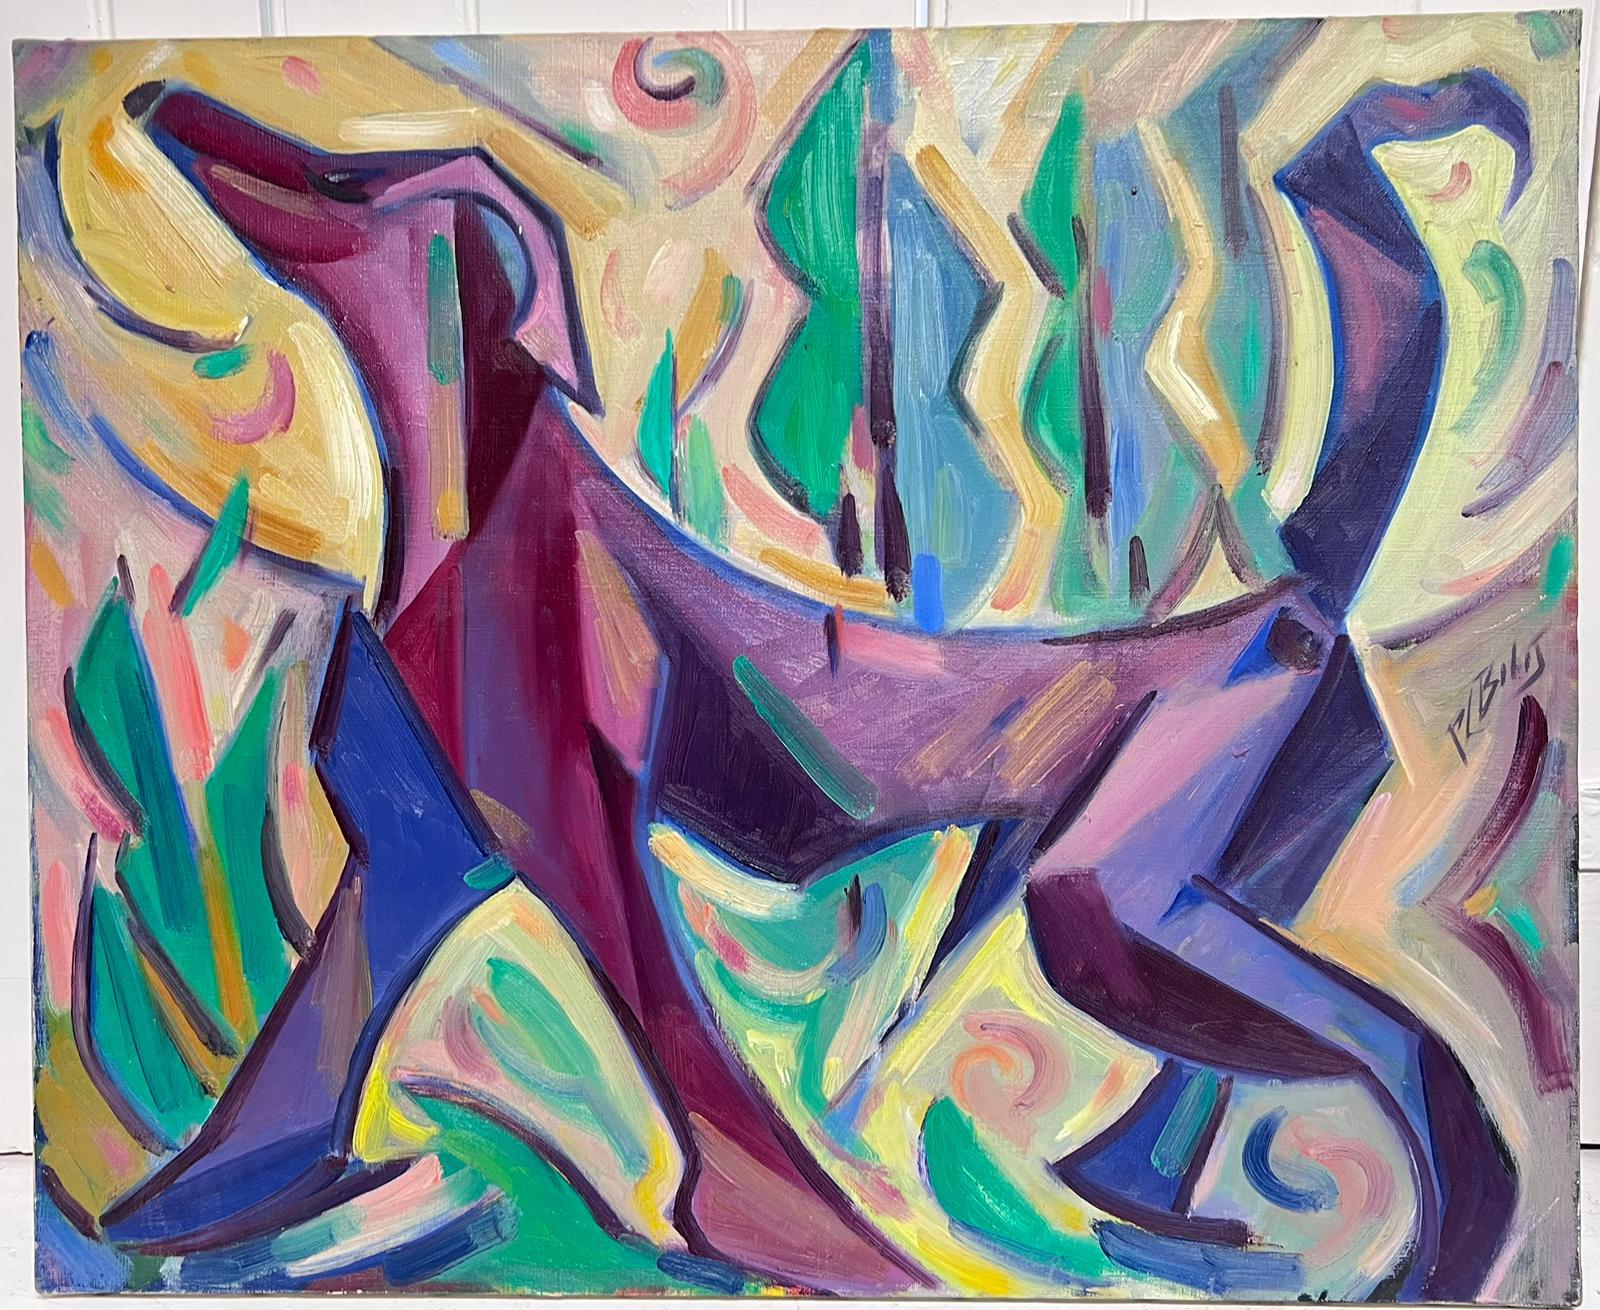 Walking Dog
by Paul-Louis Bolot (French 1918-2003)
signed
19 x 24 inches
original oil painting
condition: very good and sound
provenance: all the paintings we have by this artist have come from the artists estate in France. 
Part of the Modernist